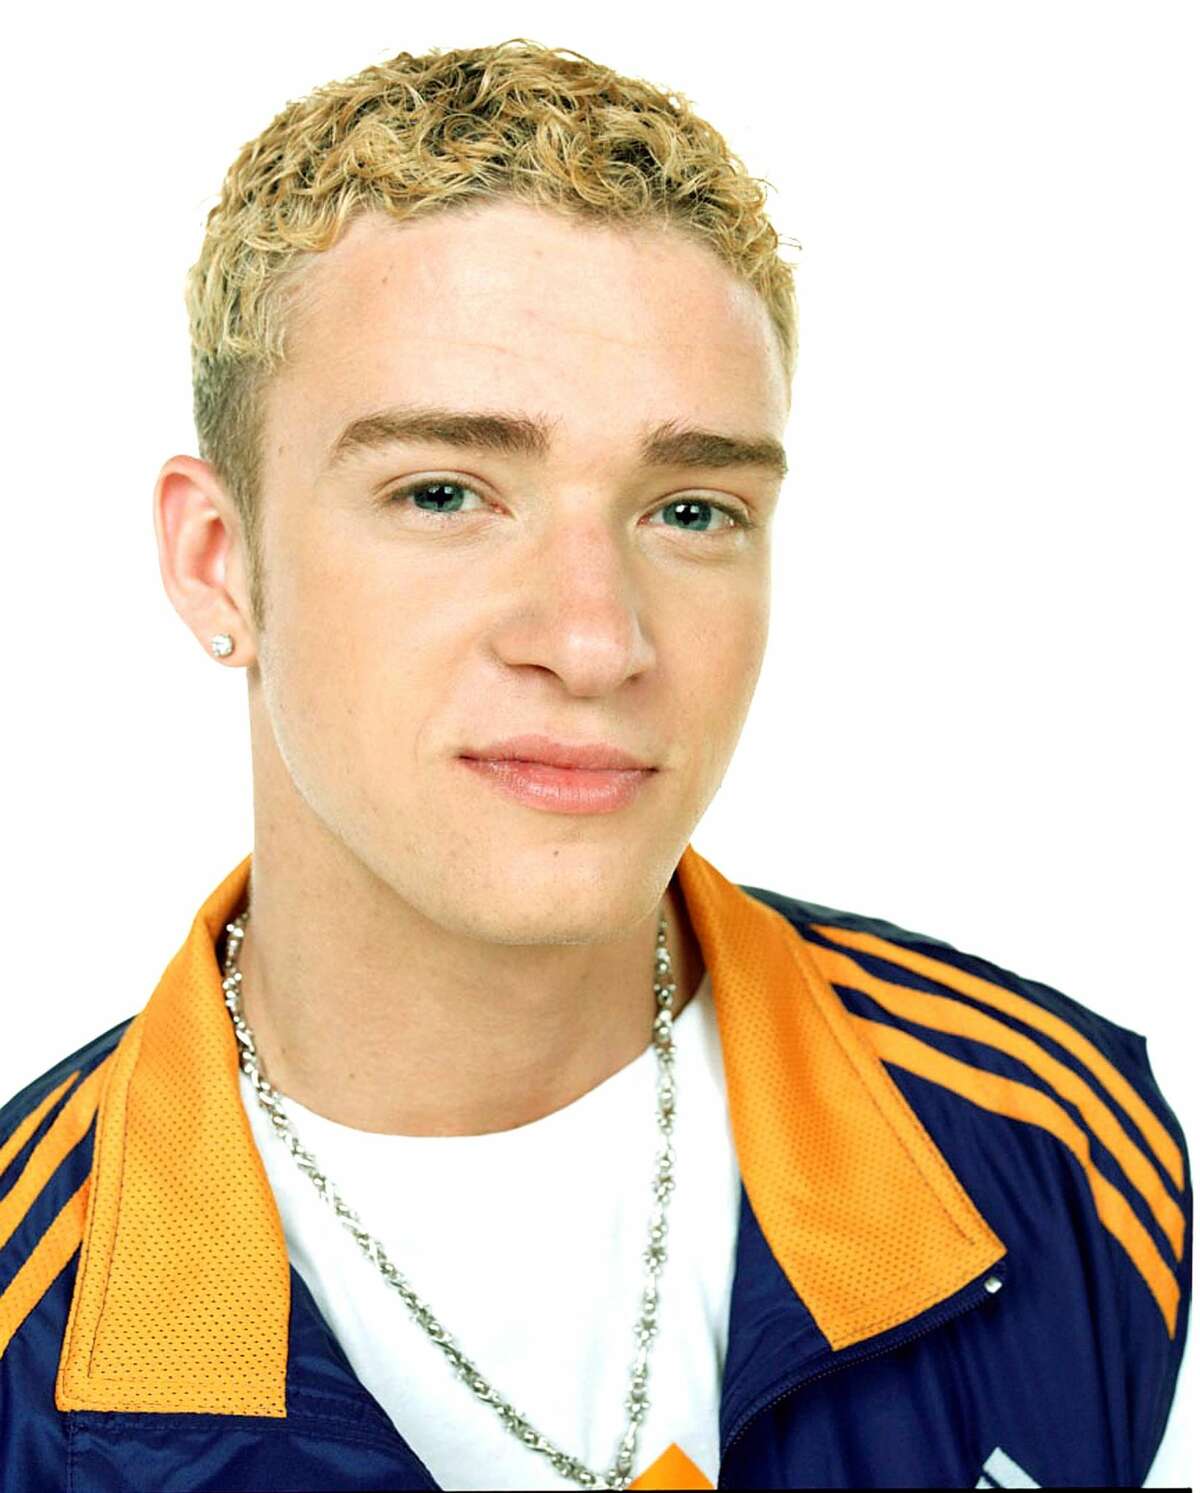 and Justin Timberlake sports his now-infamous ramen-looking frosted hair. 